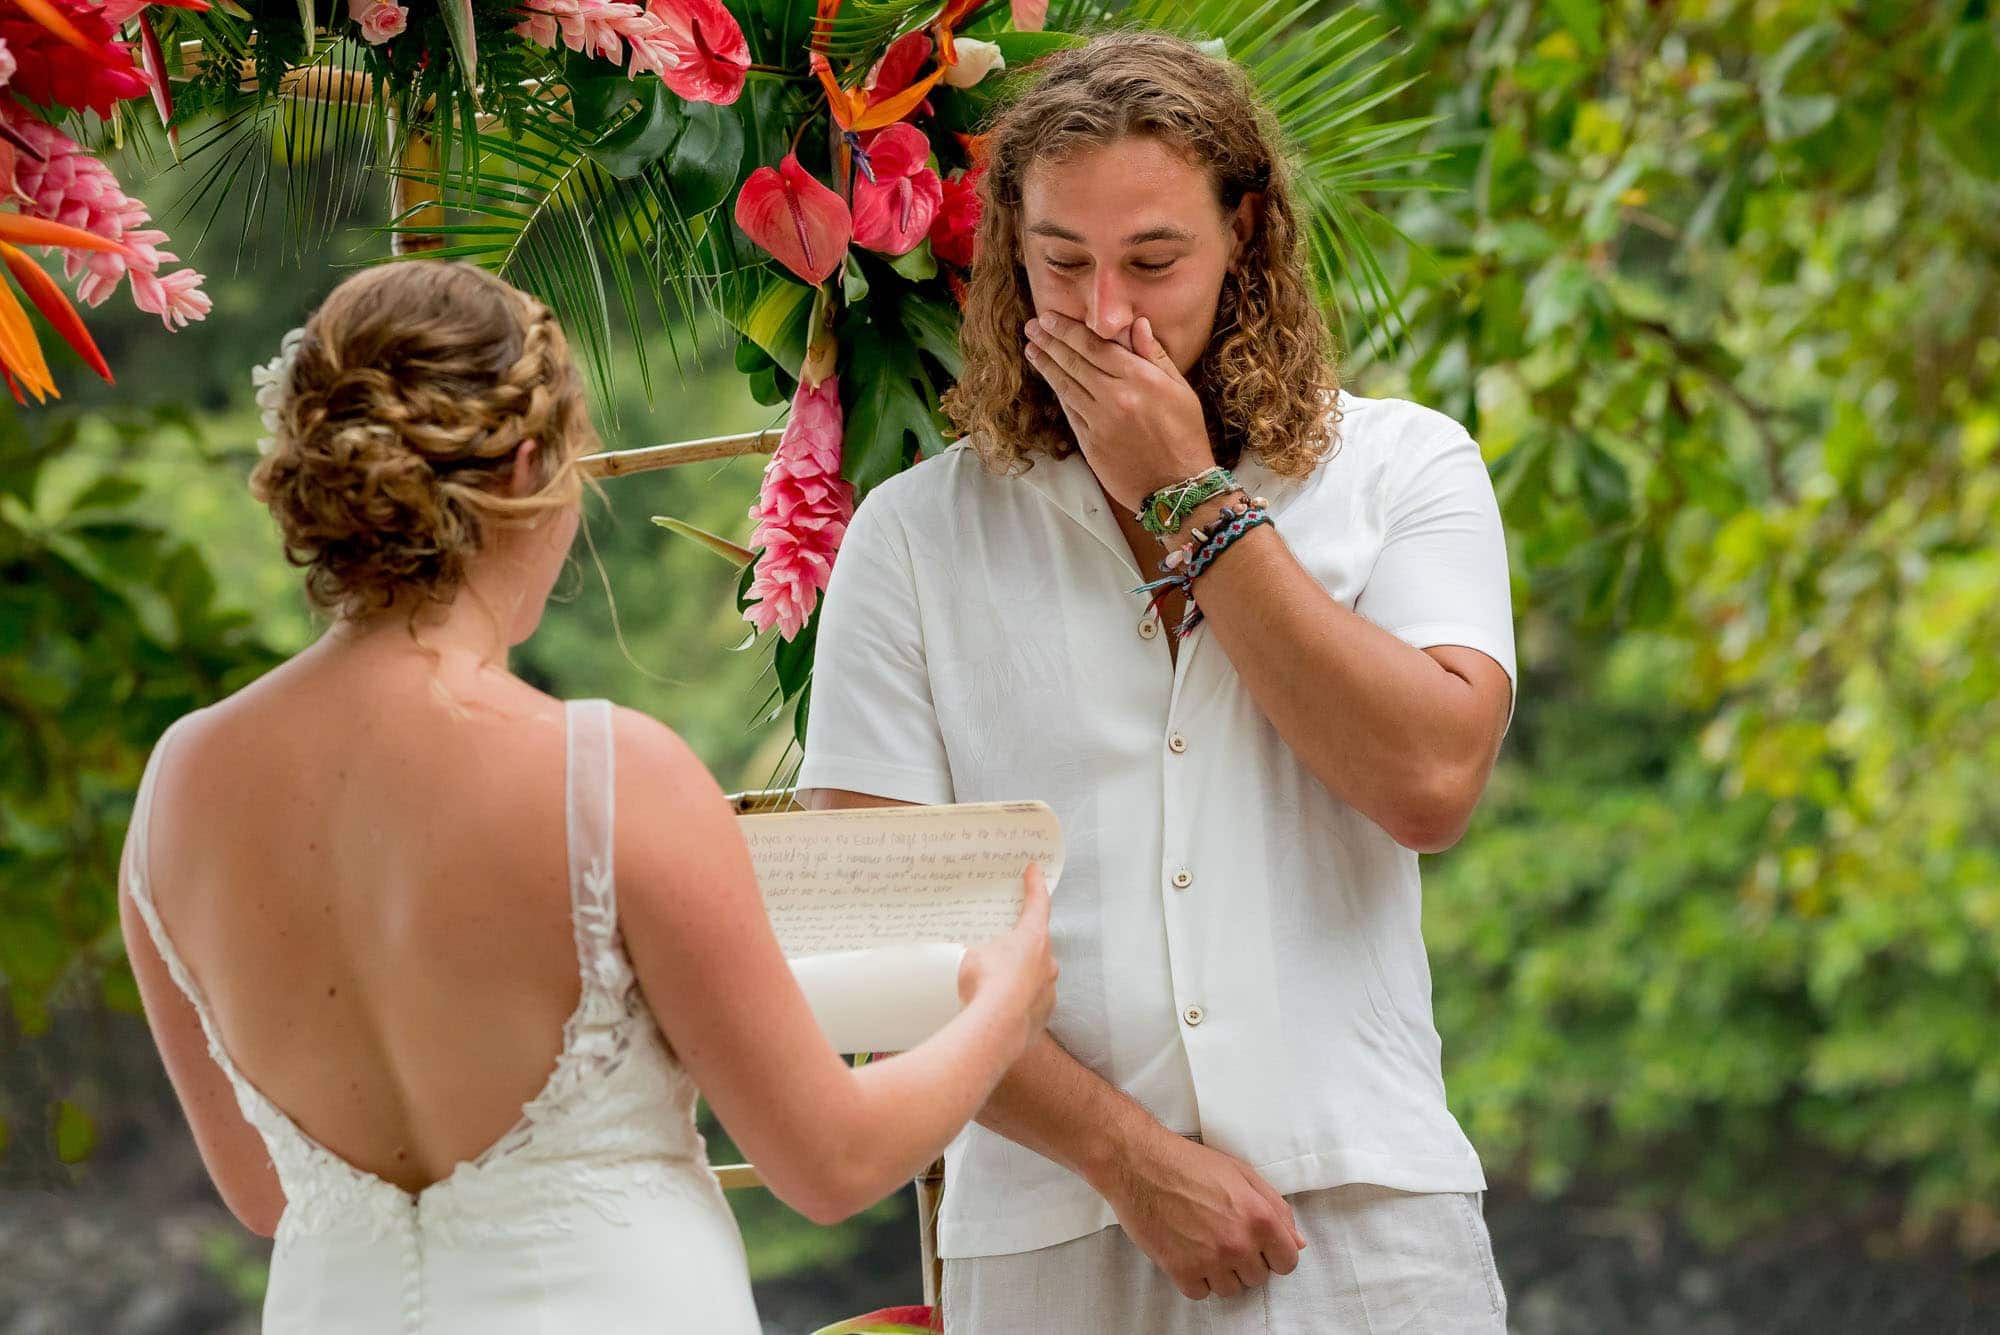 Groom gets a little emotional as the bride reads her vows